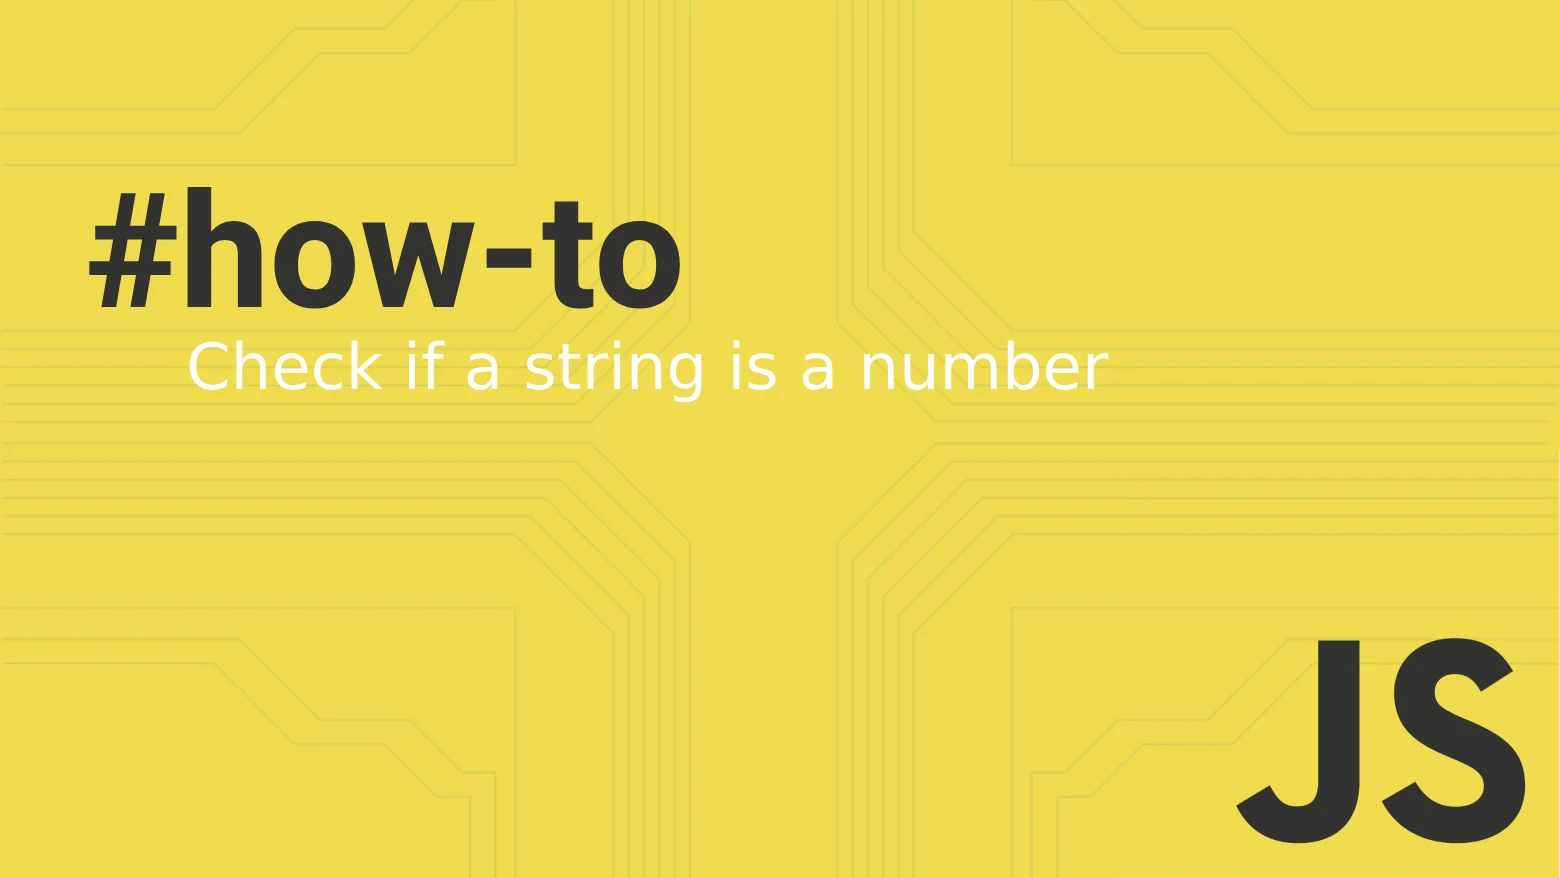 How to check if a string is a number in JavaScript